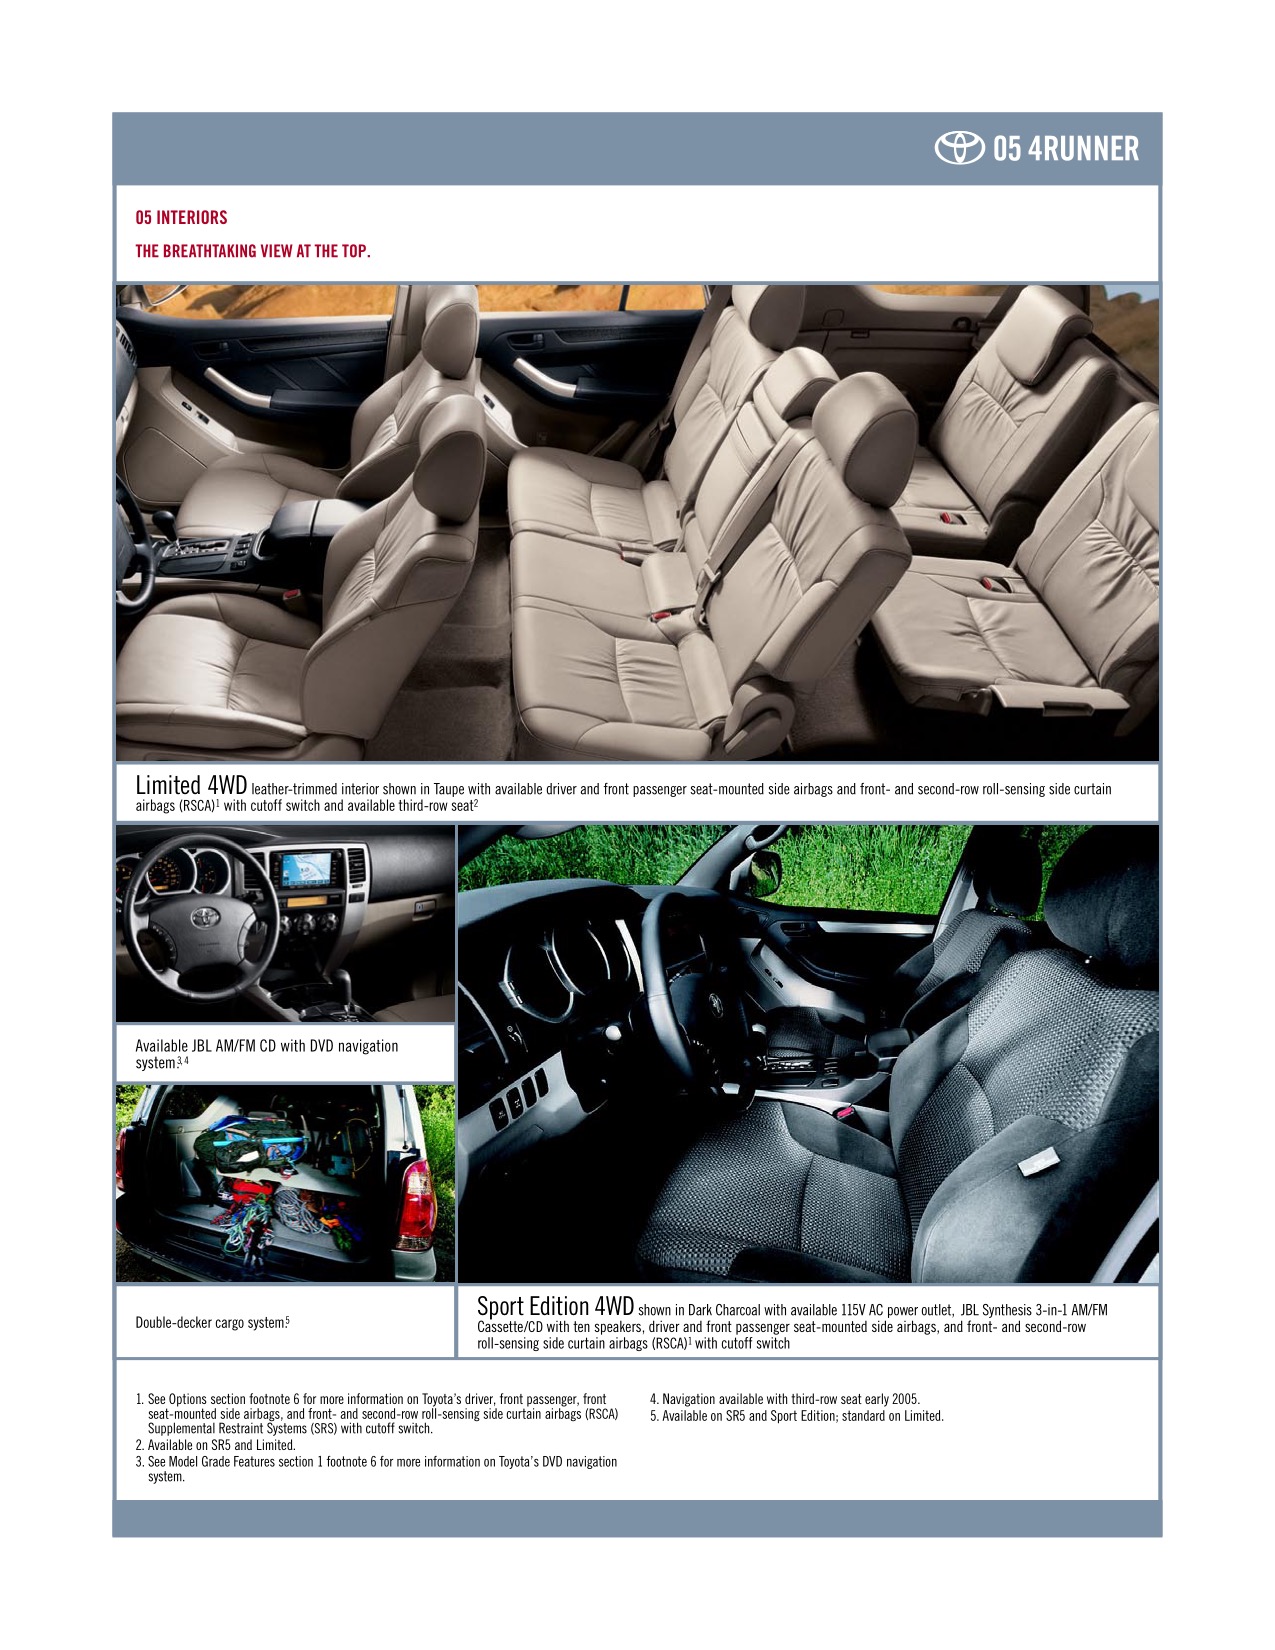 2005 Toyota 4Runner Brochure Page 3